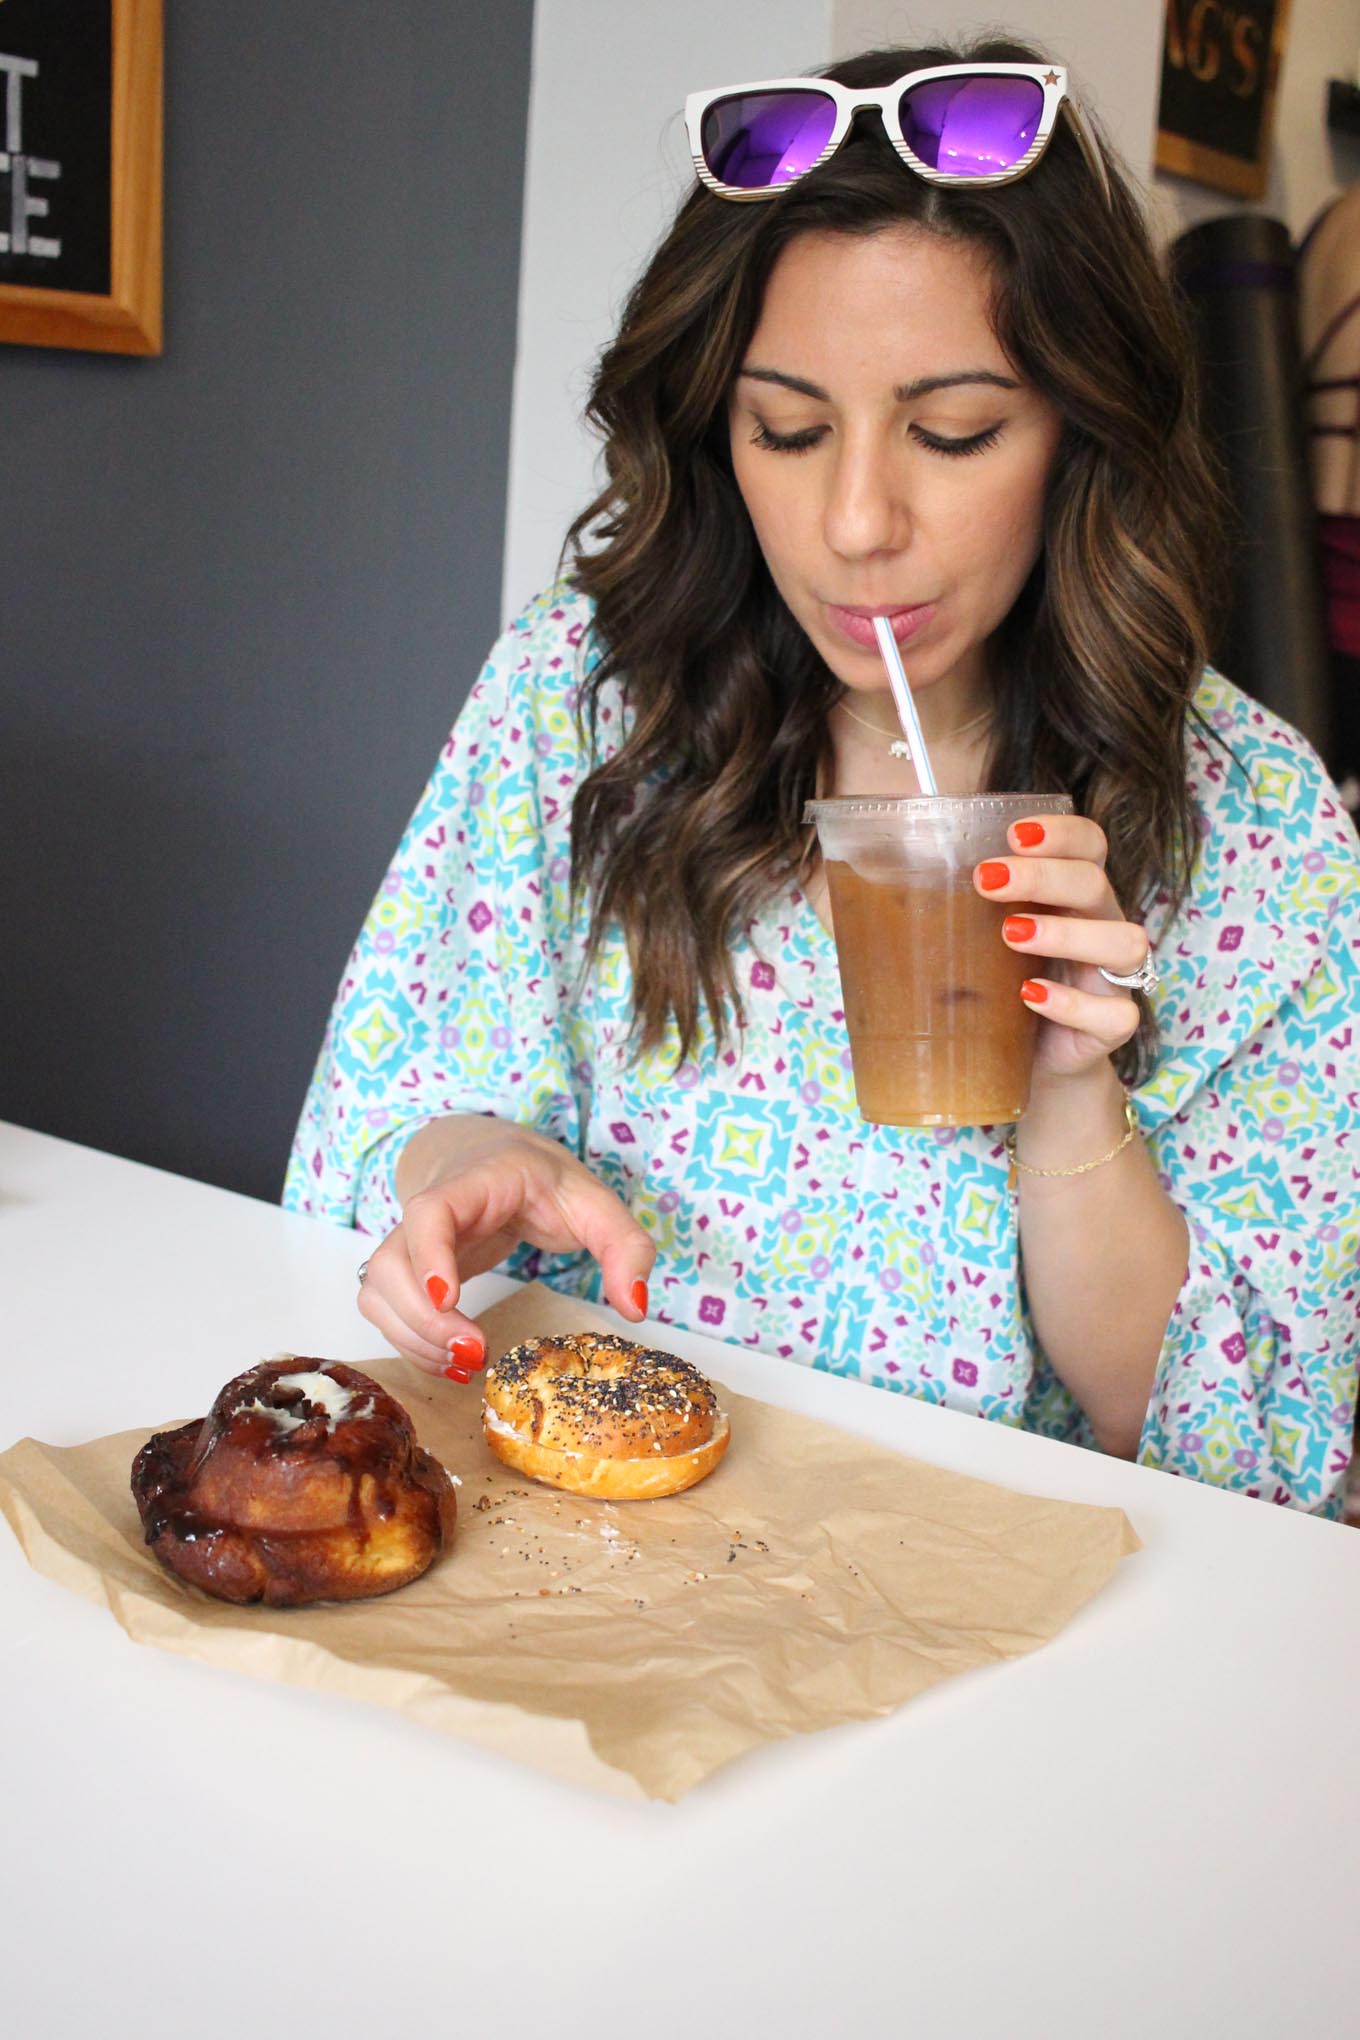 Lifestyle blogger Roxanne of Glass of Glam wearing a Cuddy Studios Romper, Winkwood Sunglasses, and her review of the 100% gluten free Rise Bakery